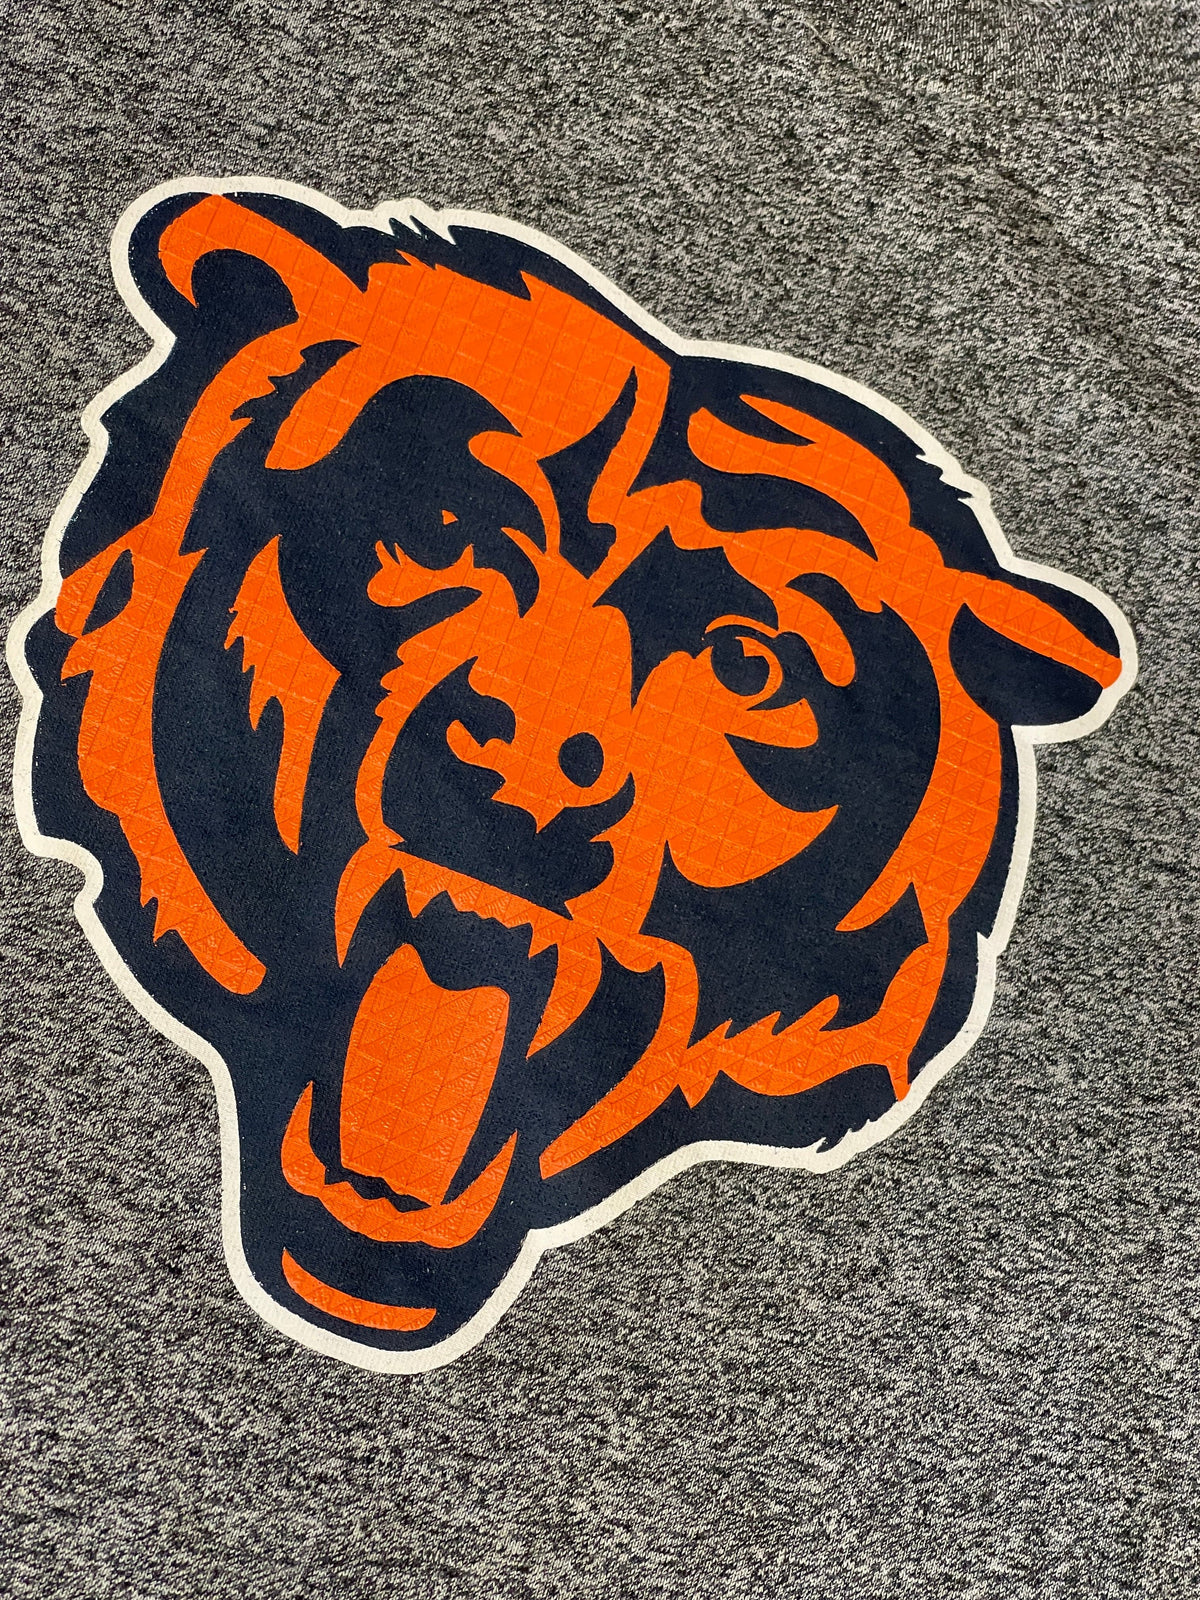 NFL Chicago Bears Textured Logo T-Shirt Youth Small 6-7